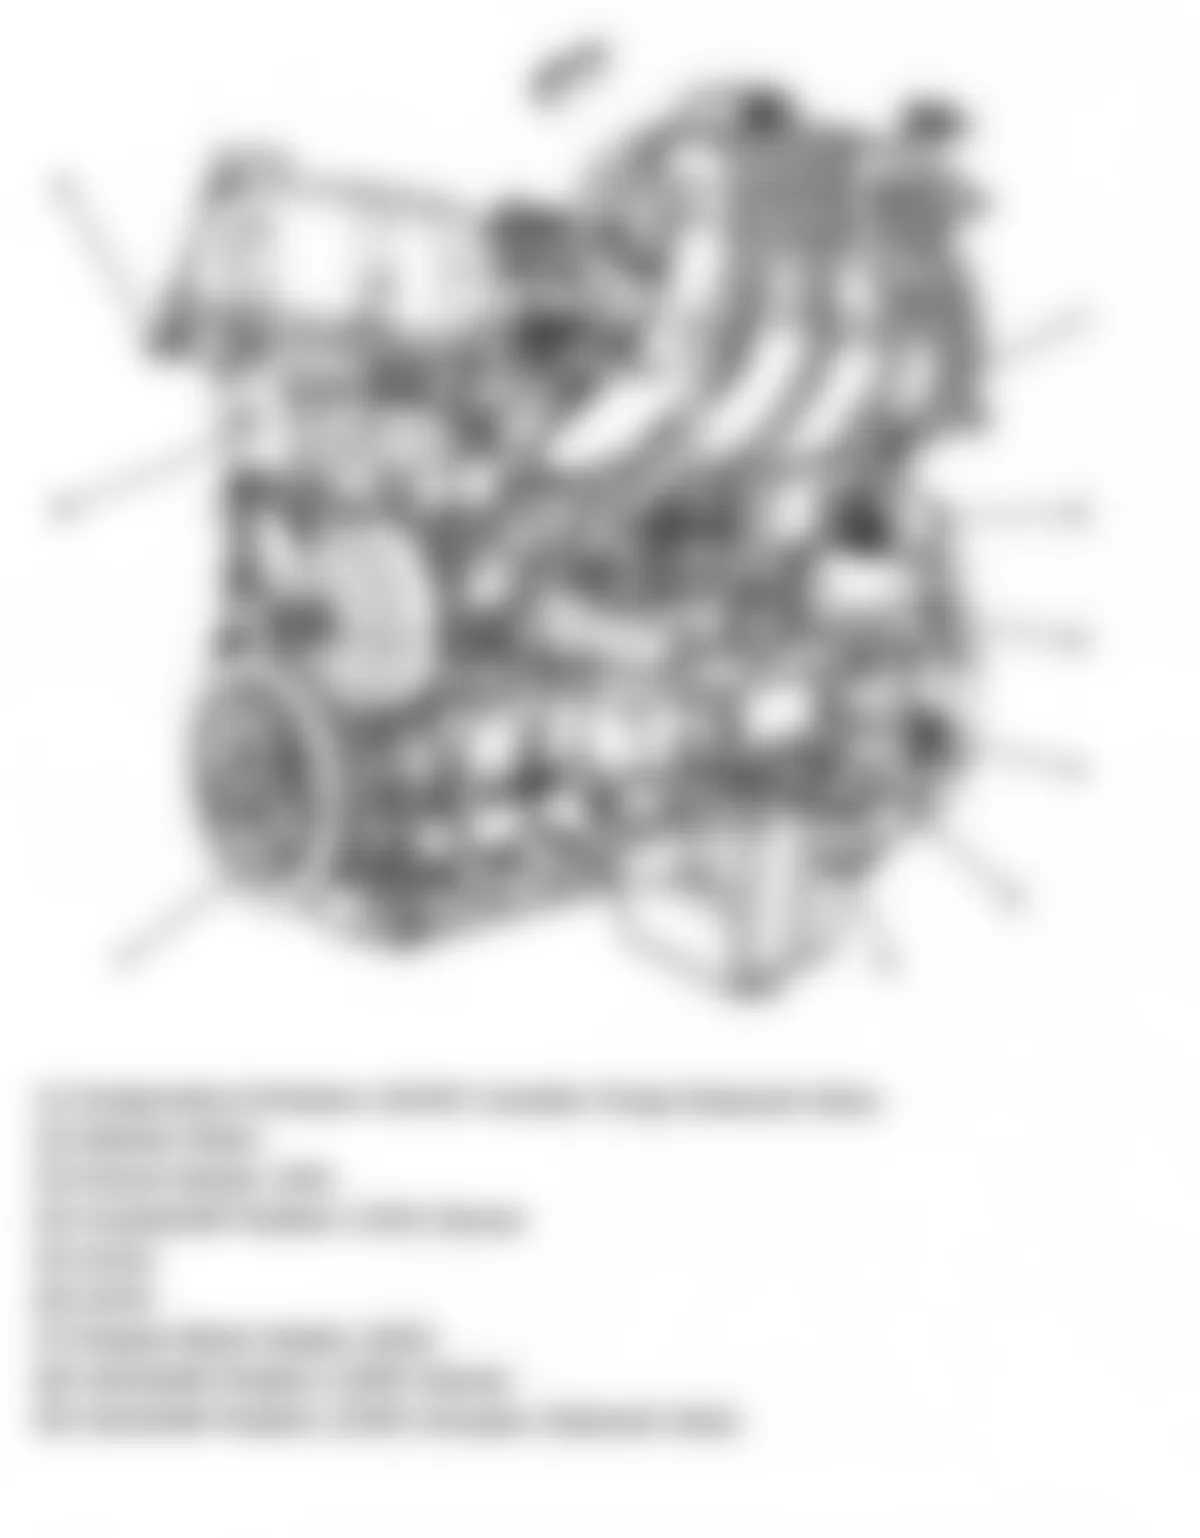 Hummer H3T 2009 - Component Locations -  Front Of Engine (3.7L)